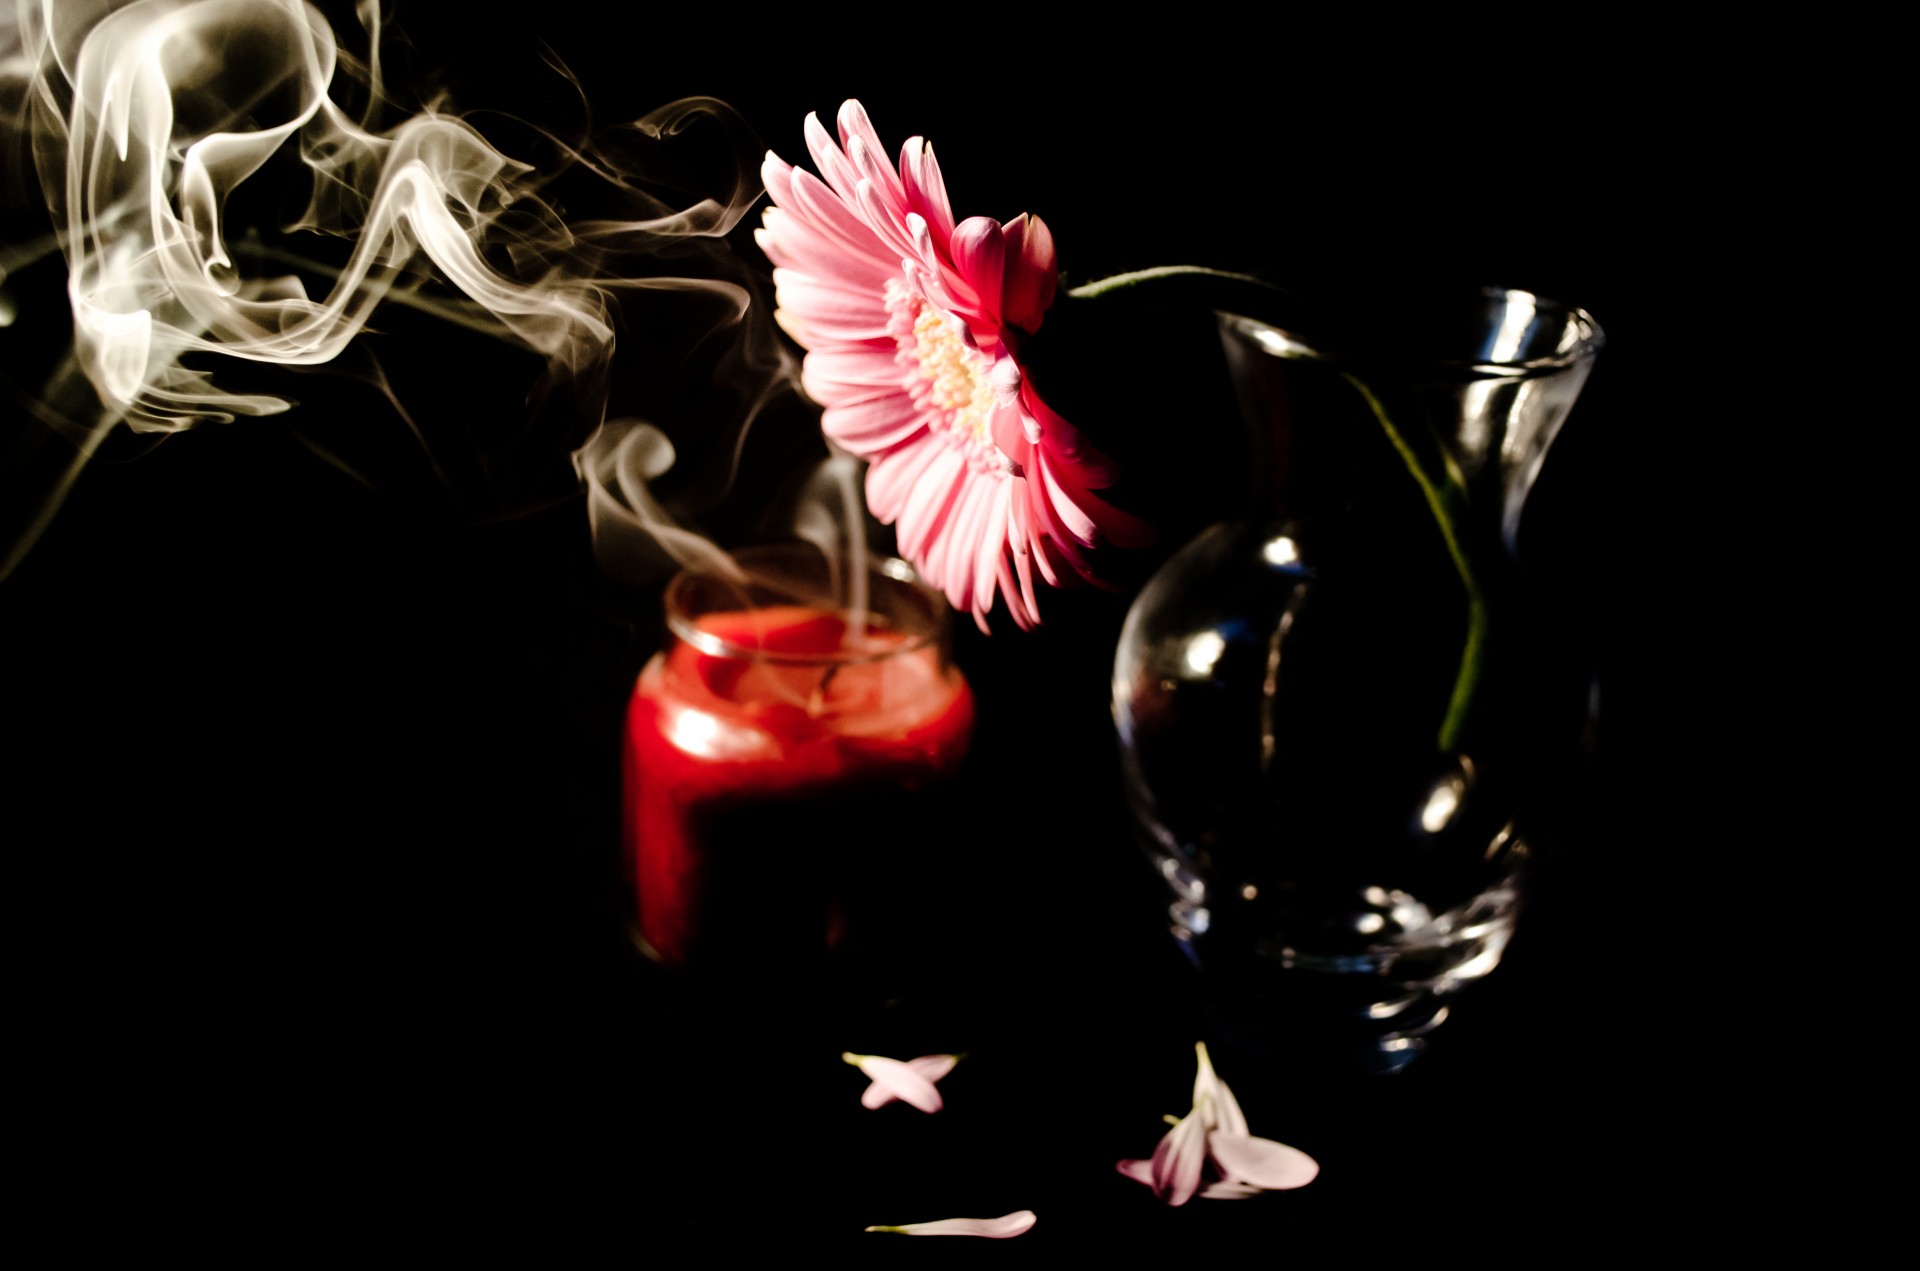 Flower And Candle